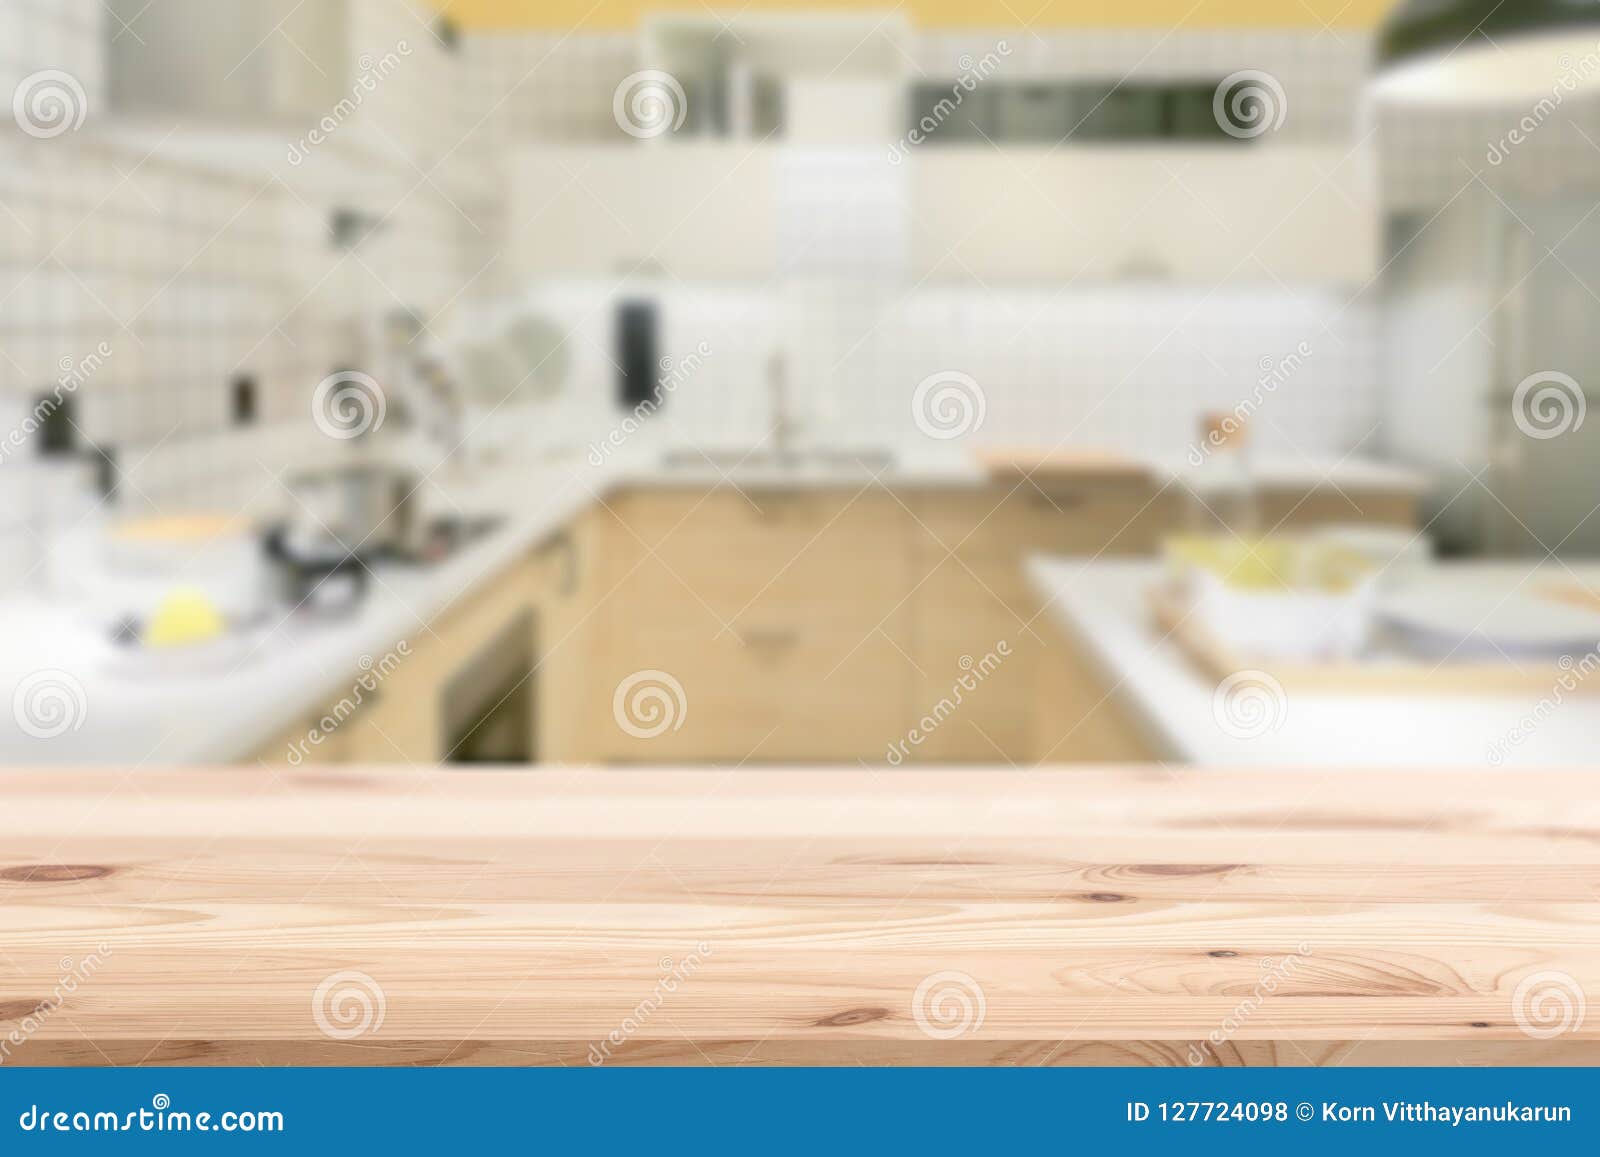 Wooden Table Counter with Blur Kitchen for Montage Stock Photo - Image ...